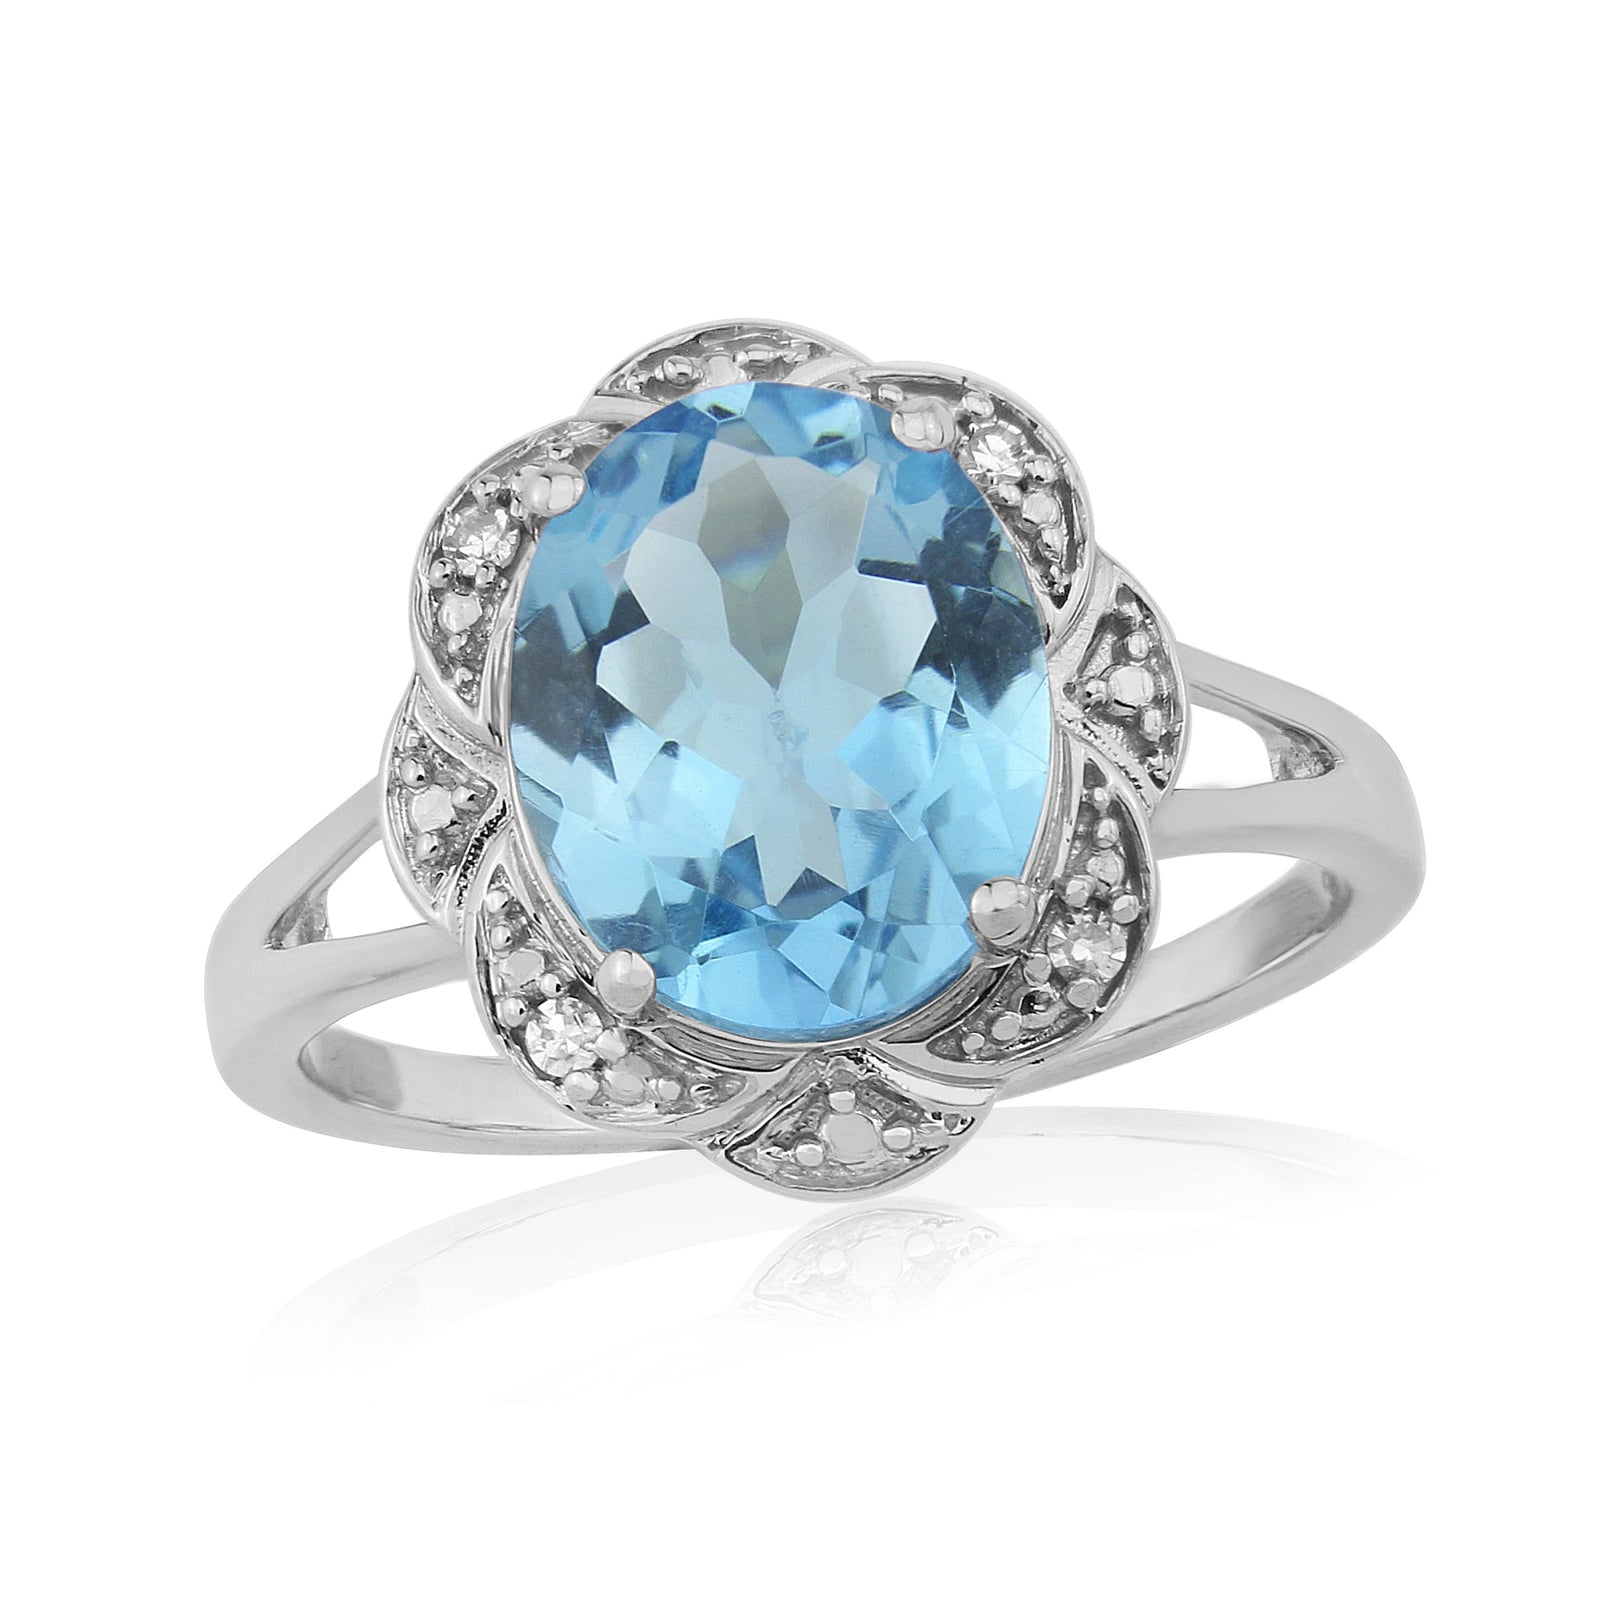 9ct white gold 10x8mm oval blue topaz & diamond cluster ring 0.03ct